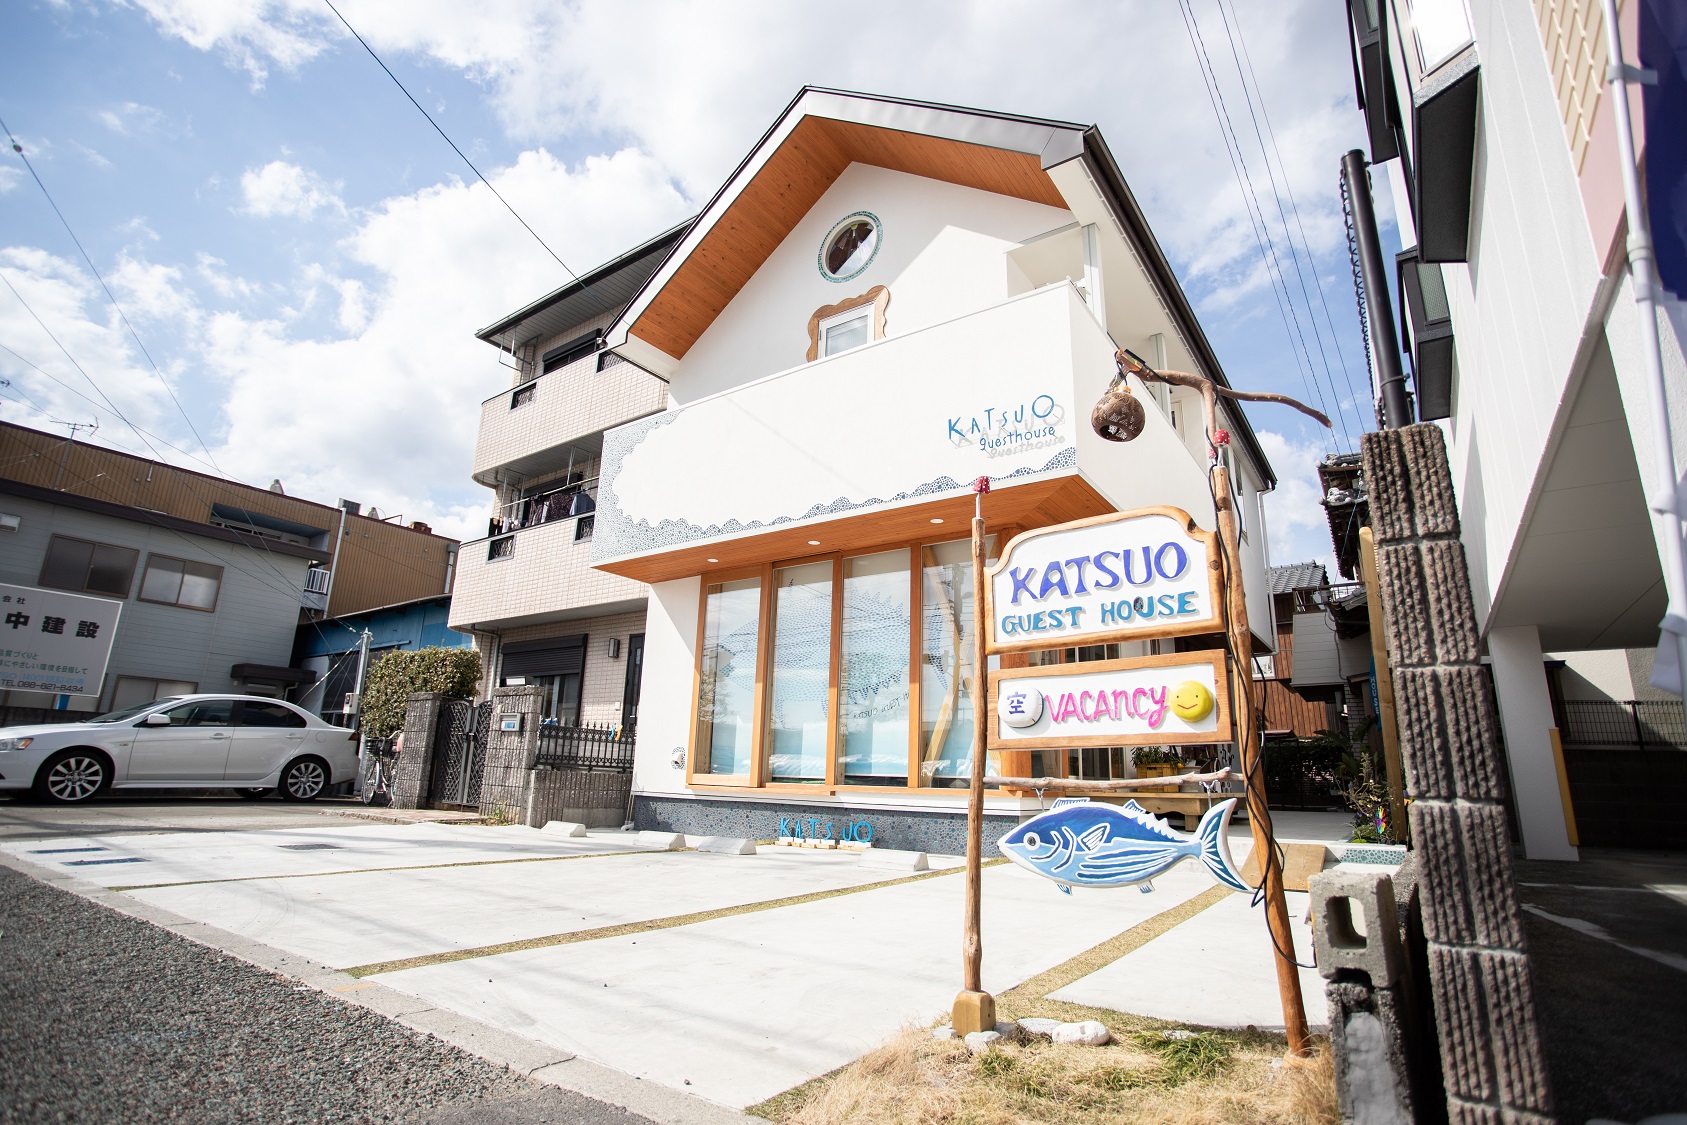 Katsuo Guest House